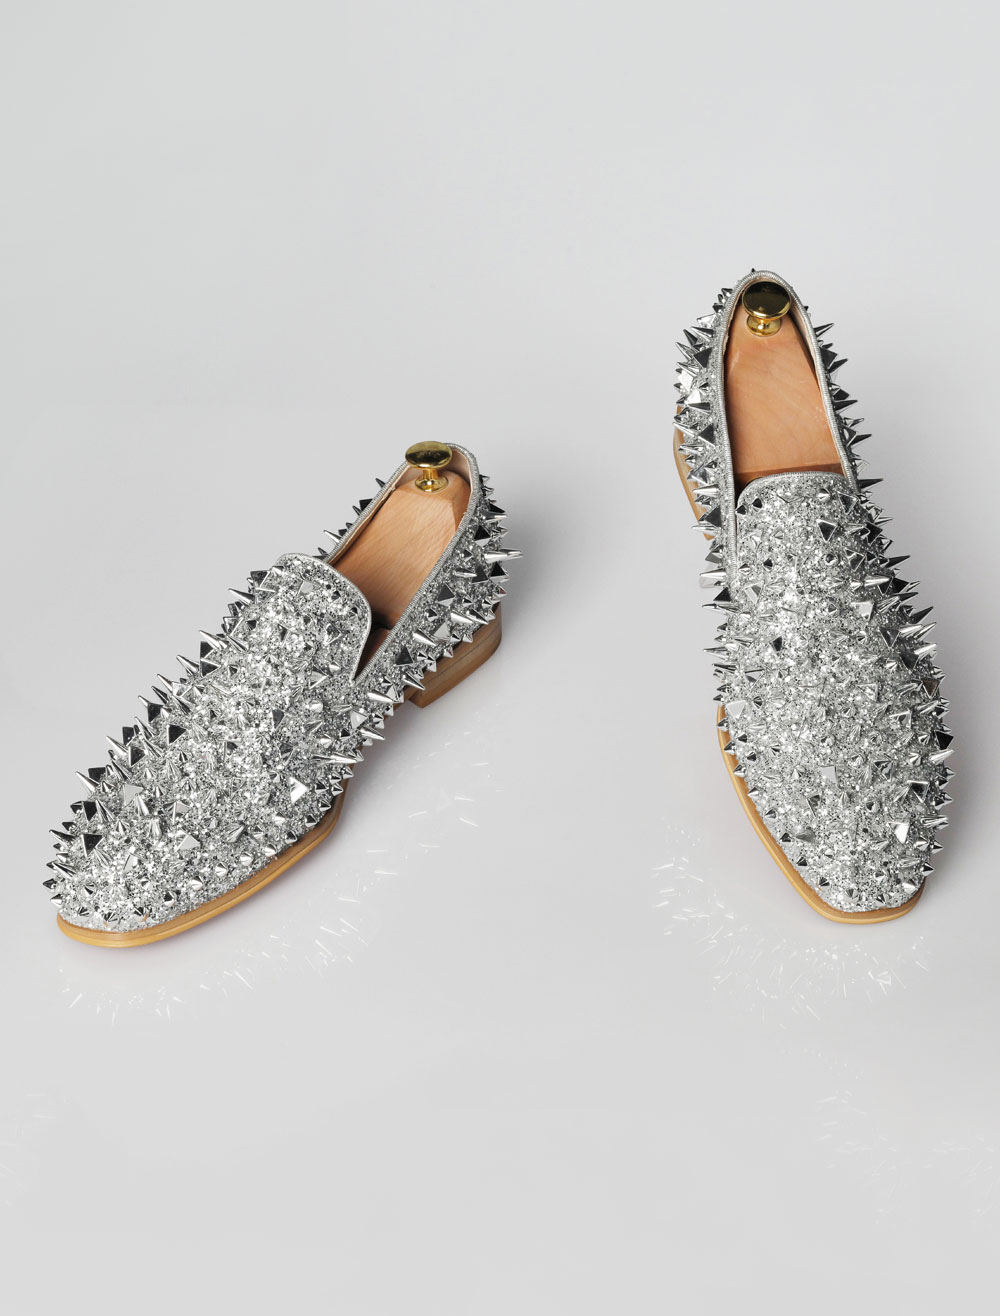 mens silver spiked loafers